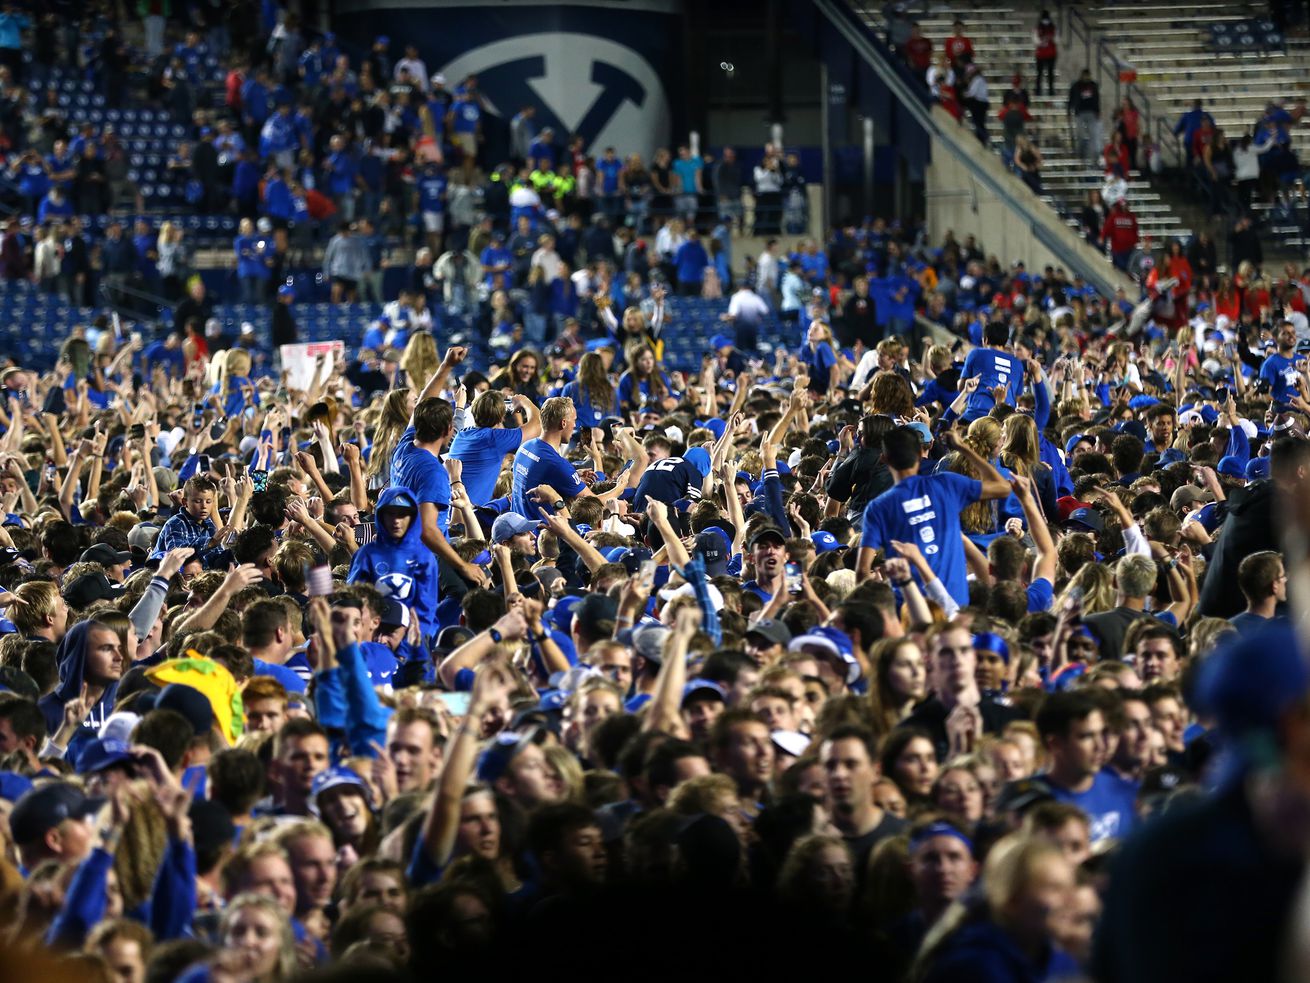 Fans swarm the field after BYU beat Utah in at LaVell Edwards Stadium in Provo on Saturday, Sept. 11, 2021. BYU won 26-17.